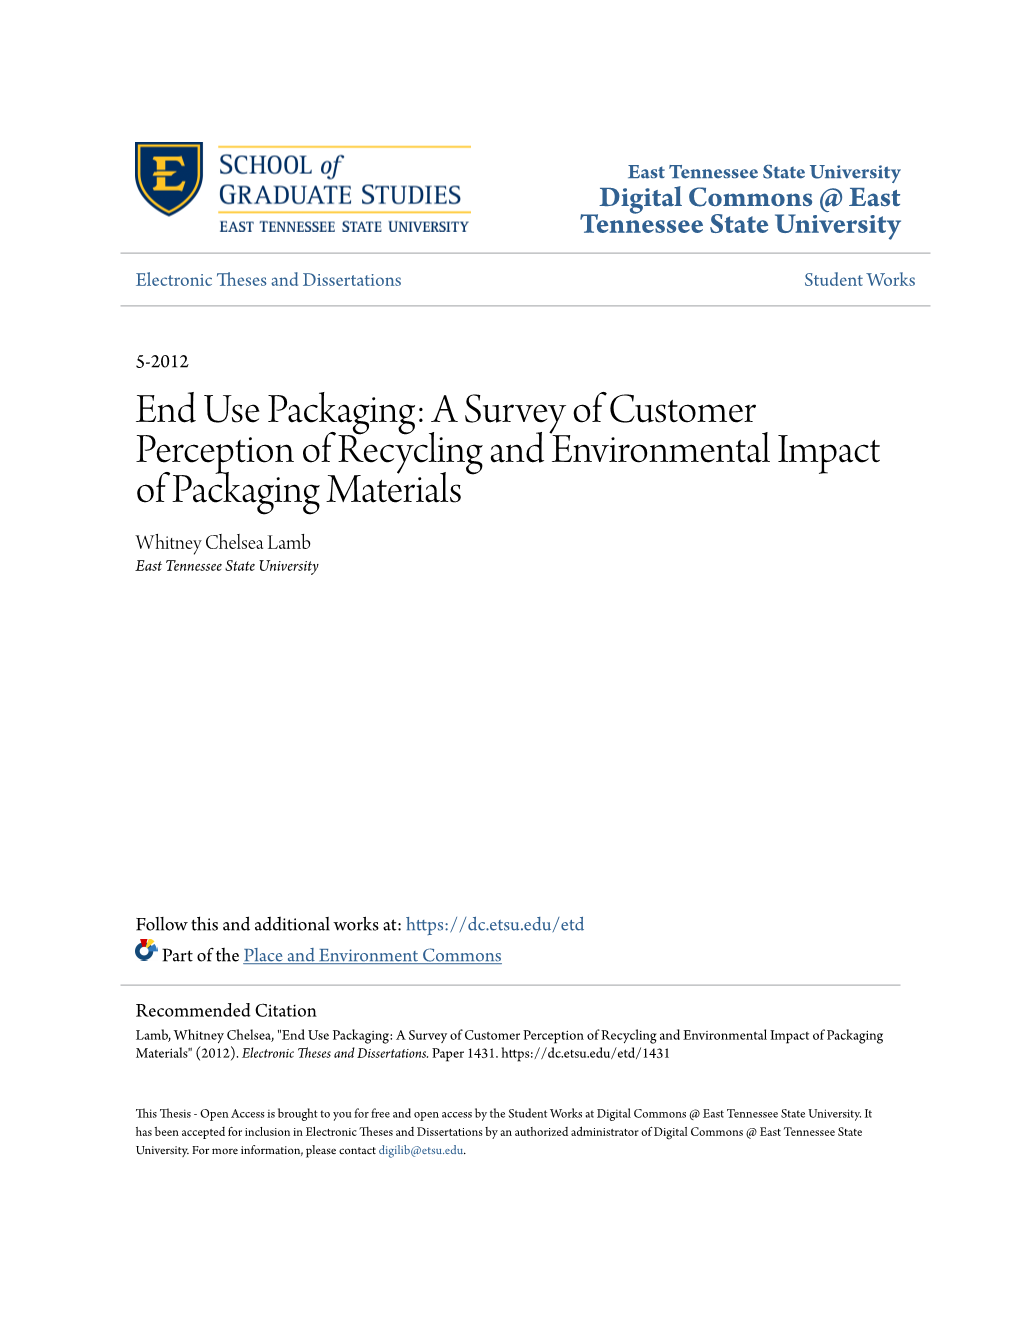 End Use Packaging: a Survey of Customer Perception of Recycling and Environmental Impact of Packaging Materials Whitney Chelsea Lamb East Tennessee State University